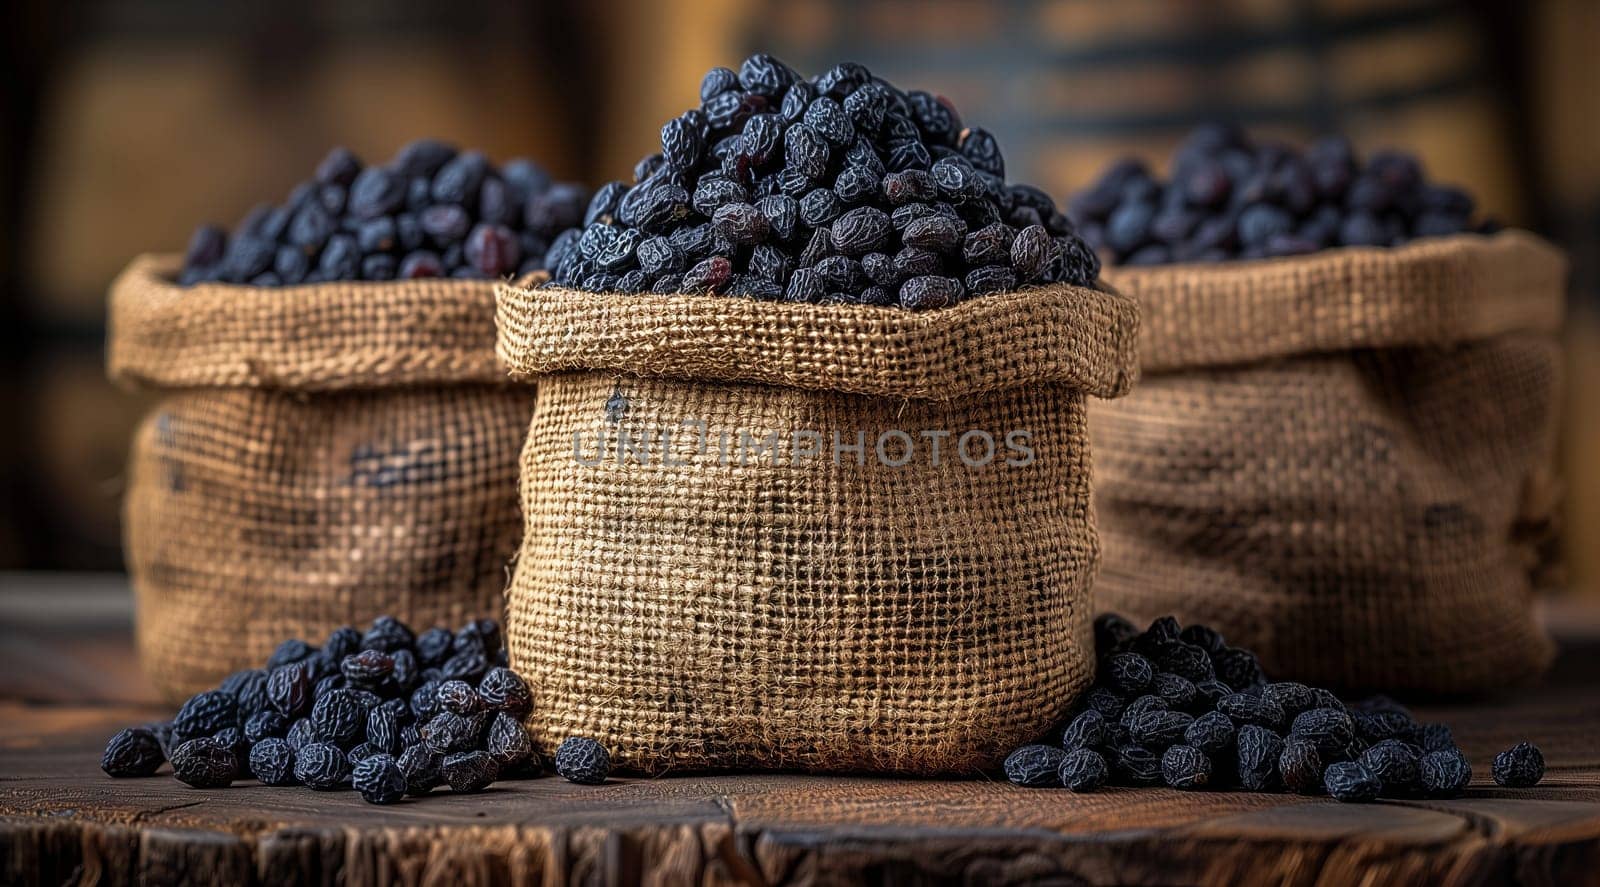 Three bags of blueberries resting on a wooden table by richwolf